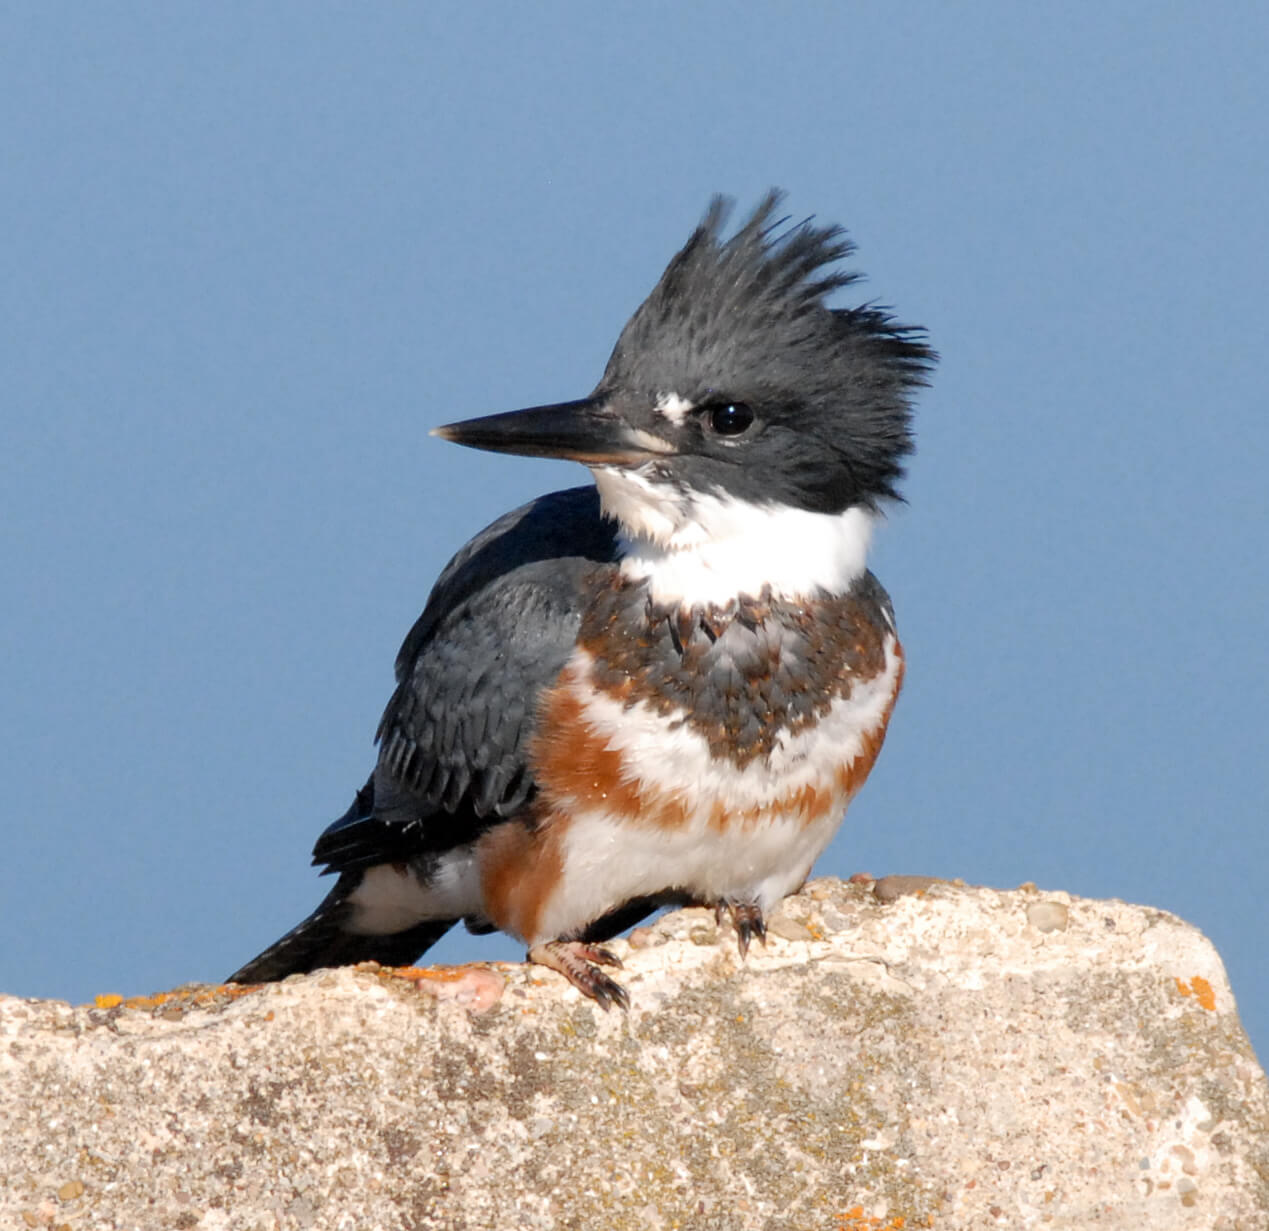 An Outstretched Belted Kingfisher